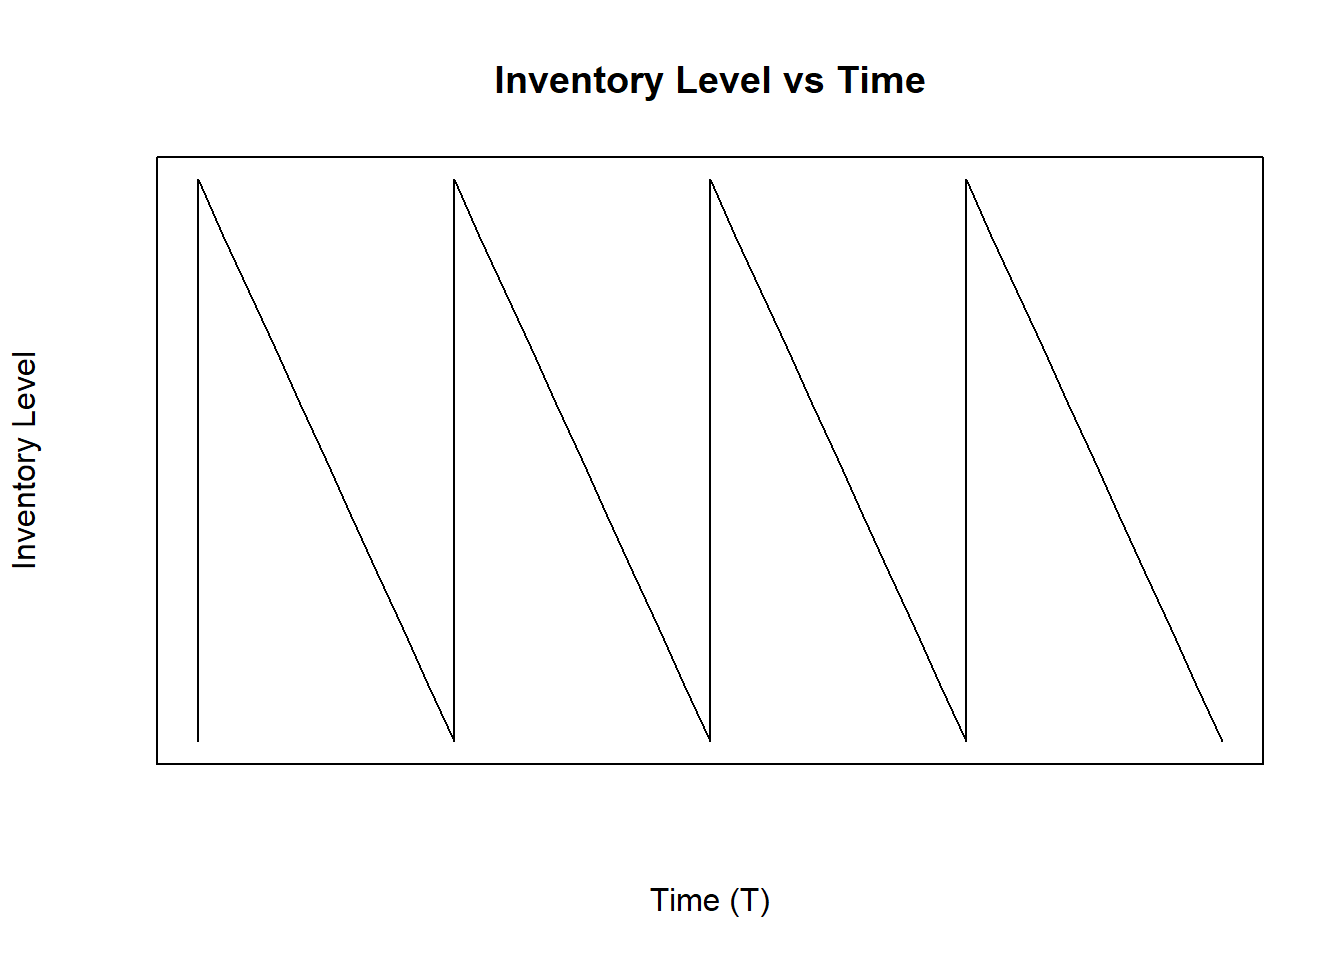 Inventory Level with Constant Demand Rate